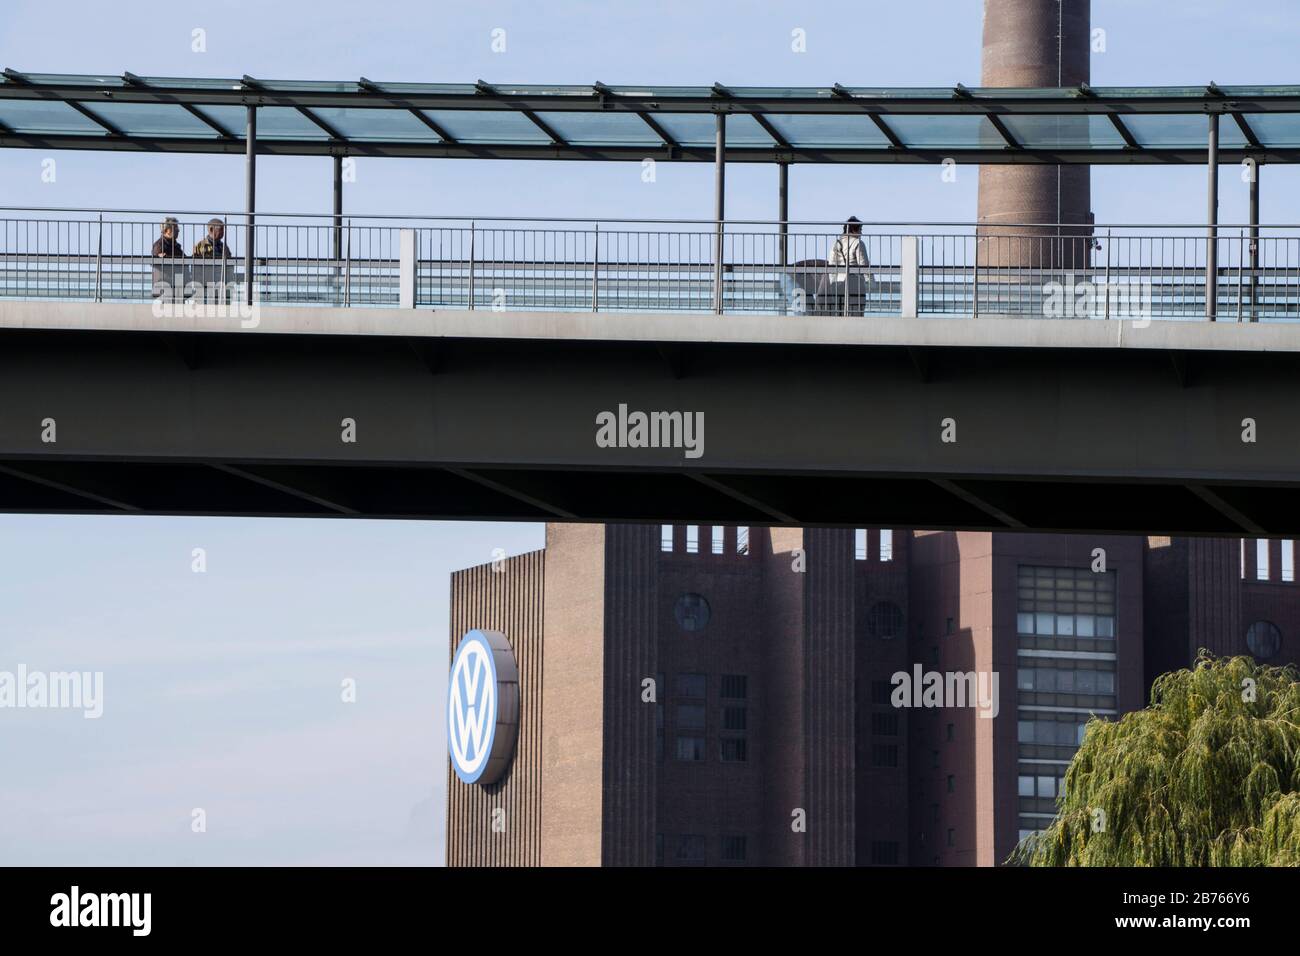 On 26.10.2015, visitors will cross a bridge into the Autostadt, the city of Wolfsburg is reacting to the expanding exhaust gas crisis at Volkswagen. The city decreed a budget freeze and a hiring freeze. Volkswagen is the largest employer in the city. [automated translation] Stock Photo